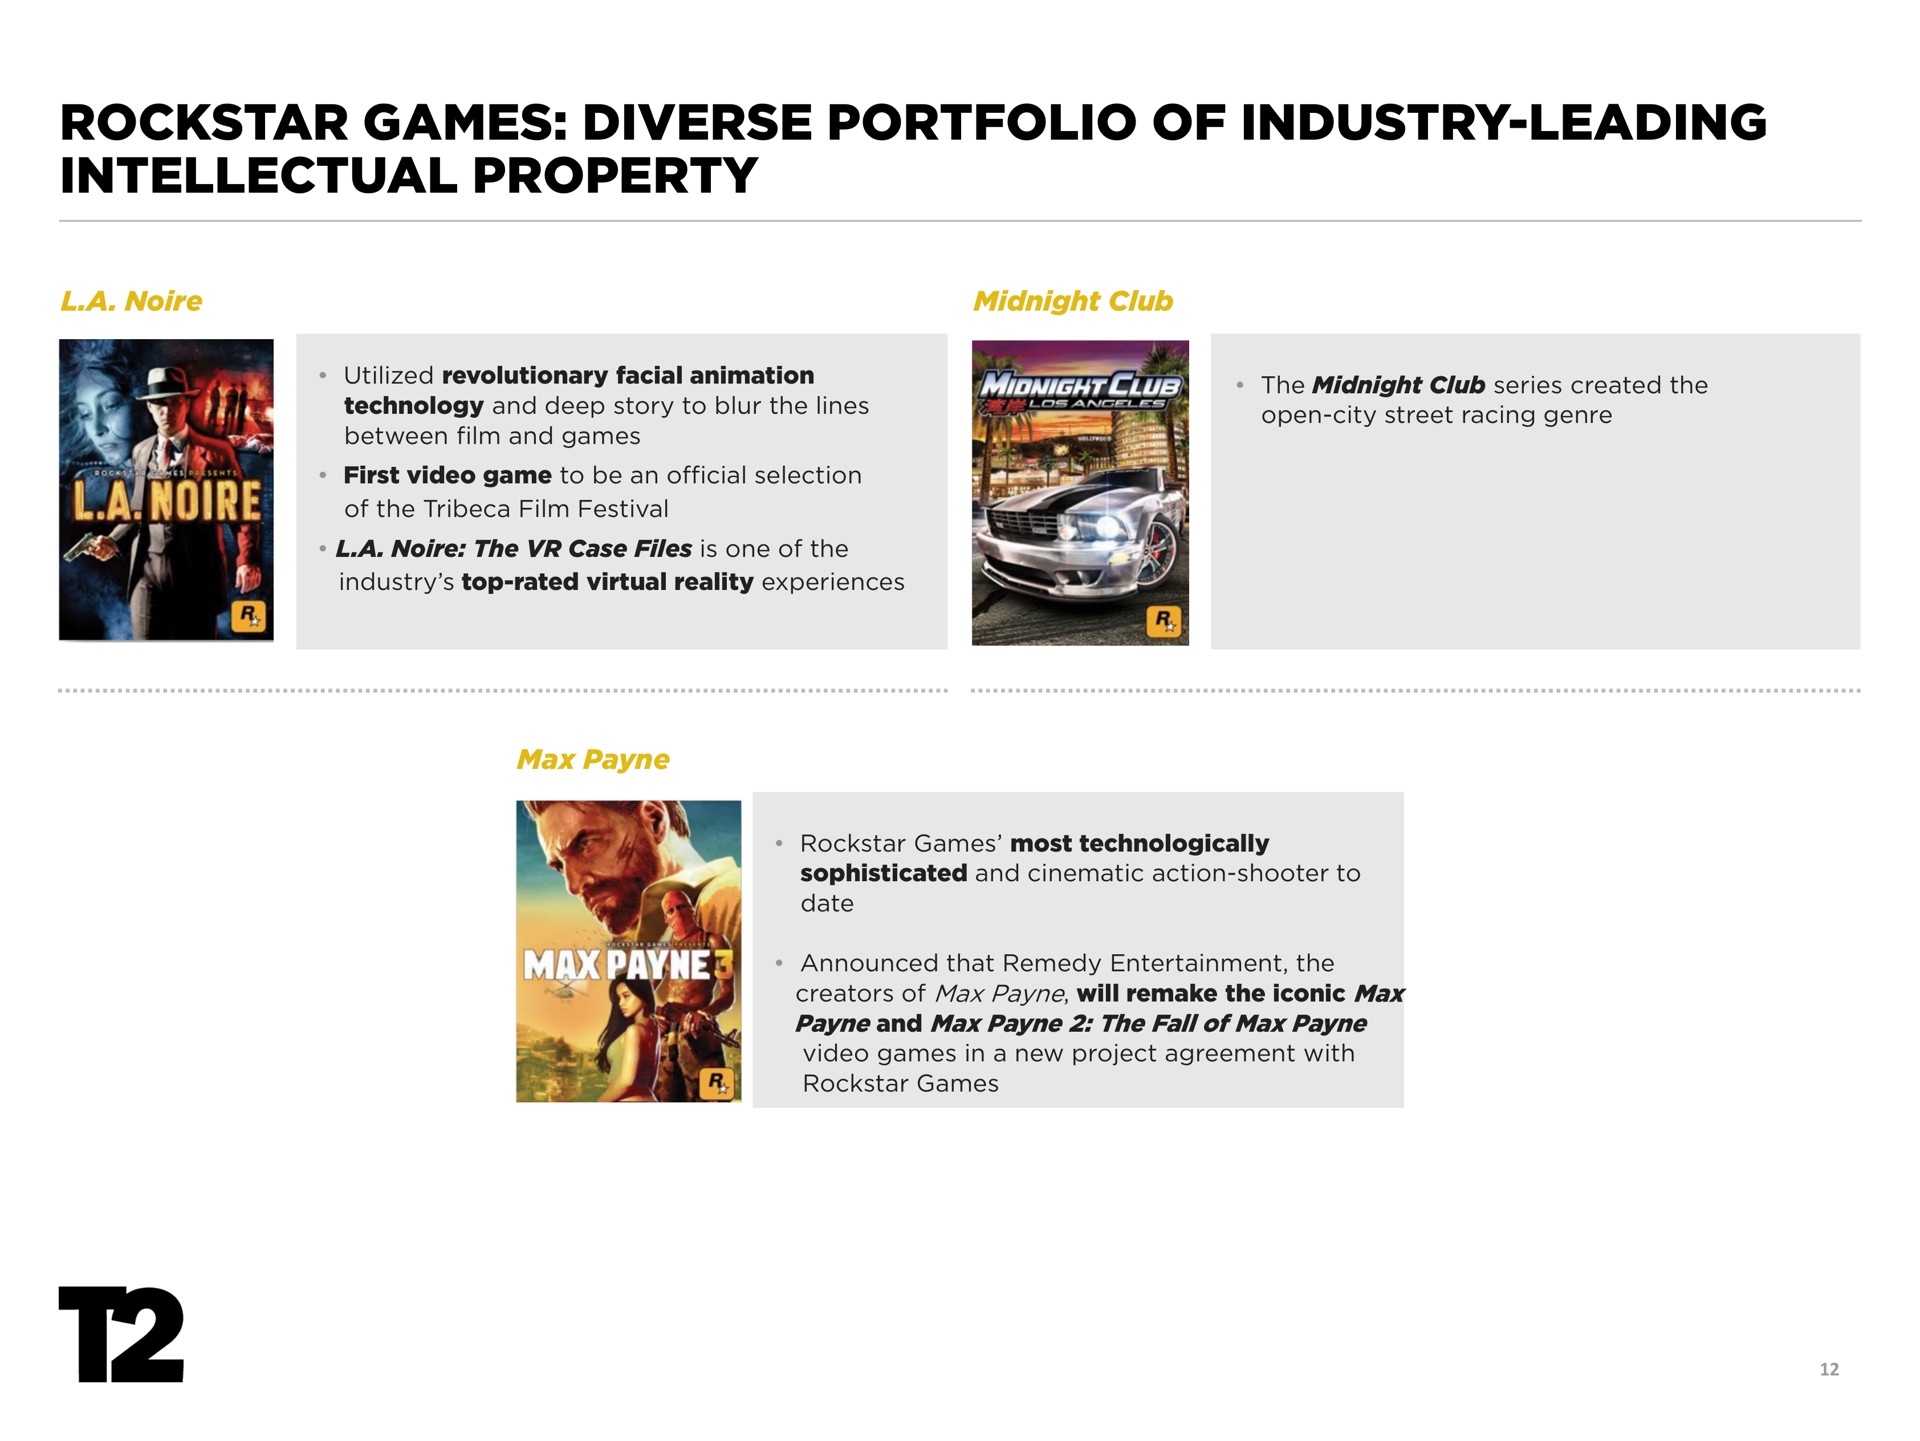 games diverse portfolio of industry leading intellectual property | Take-Two Interactive